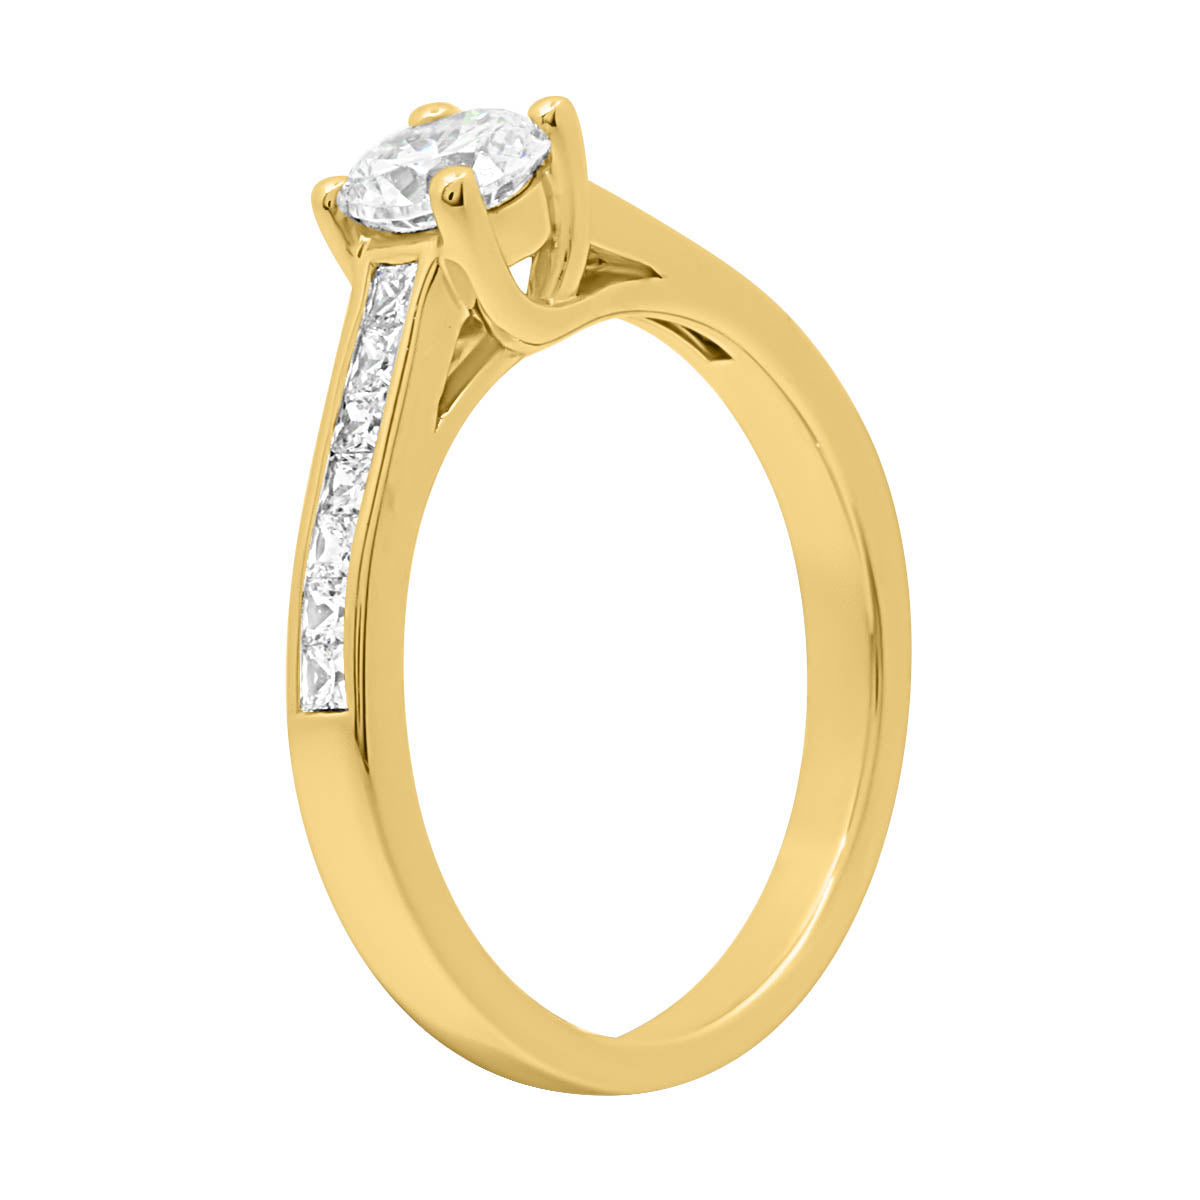 Round Diamond with Channel Set Princess Cut Diamonds in yellow gold from angled view